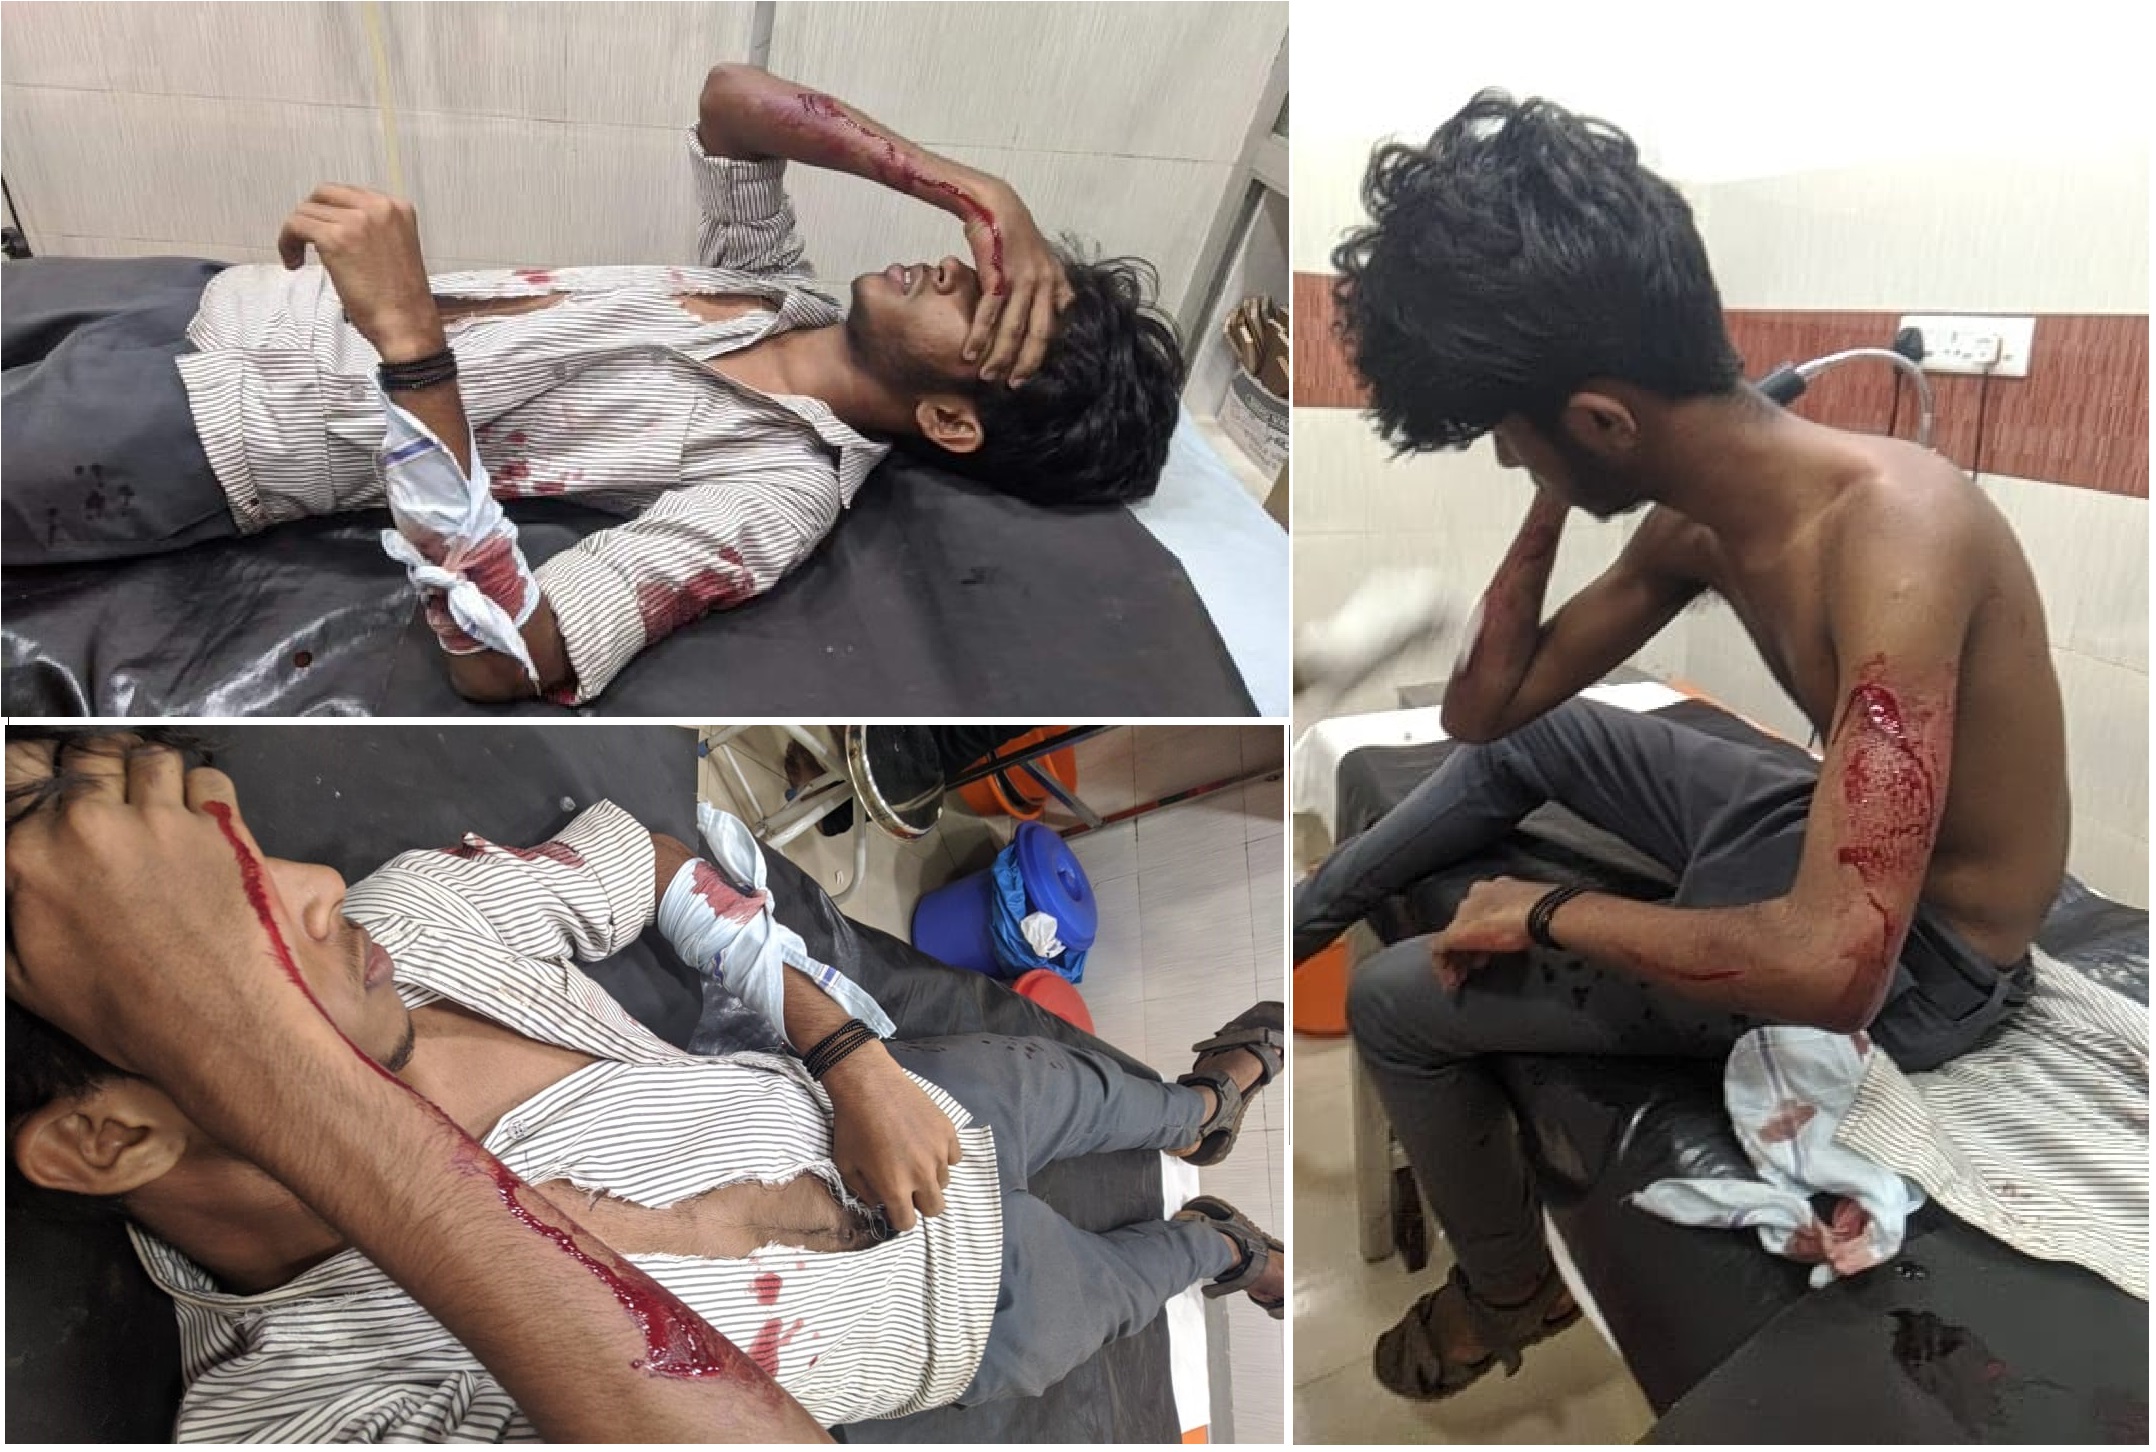 ABVP attacked_1 &nbs